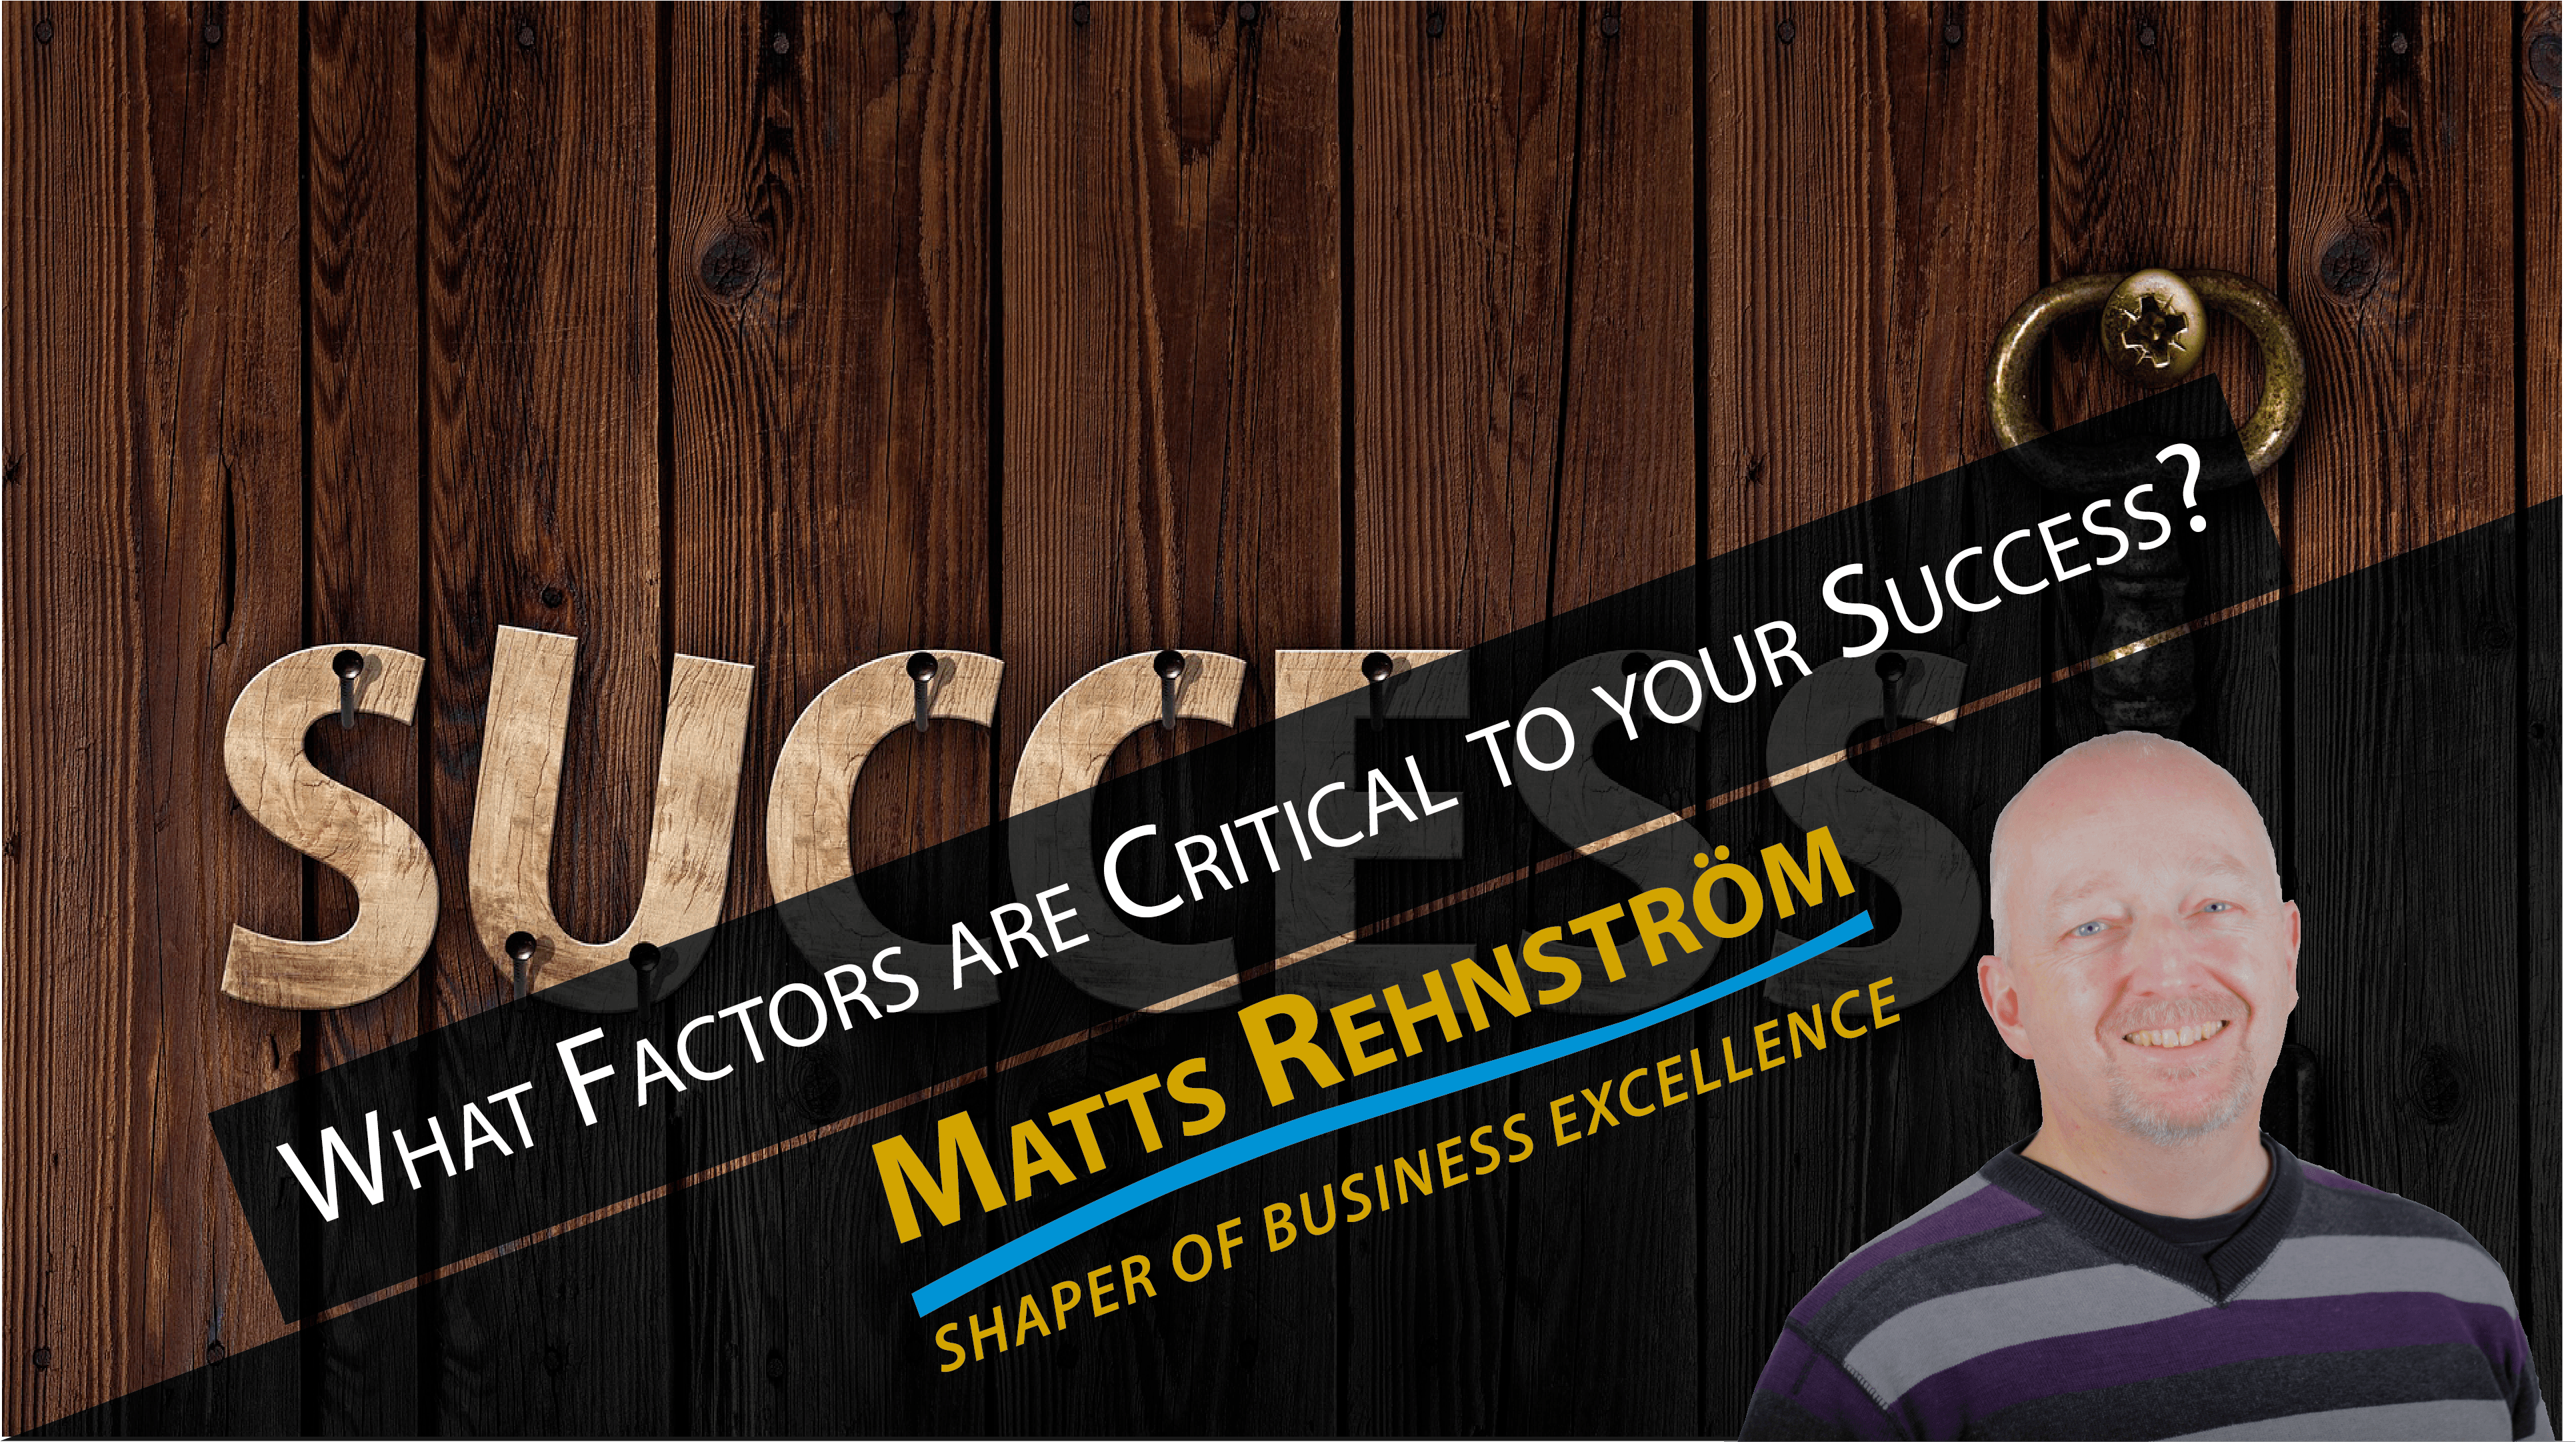 Beskrivning för "What Factors Are Critical To Your Success (BV25)"